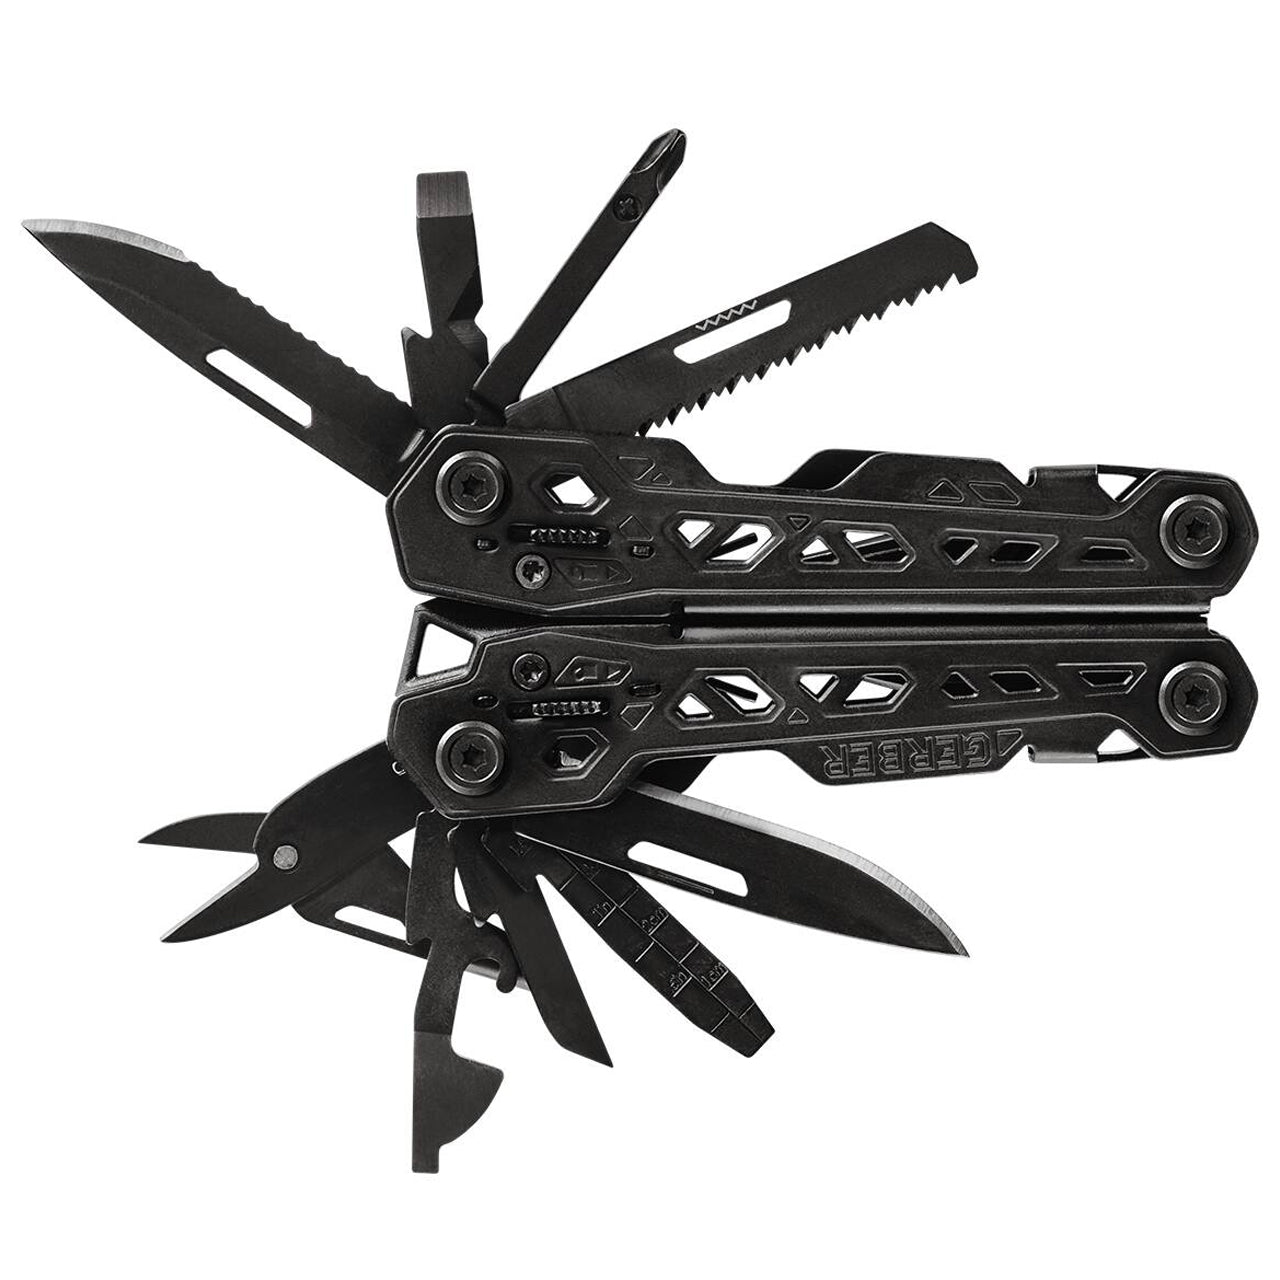 Now in blacked out! The Truss is an all-inclusive multi-tool, with 17 tools built to the exacting needs of the professional user in a size-conscious design. This full size multi-tool aims to remove excess heft while keeping all of the functionality. The result is a professional-grade multi-tool that bridges the gap between the problem and the solution. www.defenceqstore.com.au